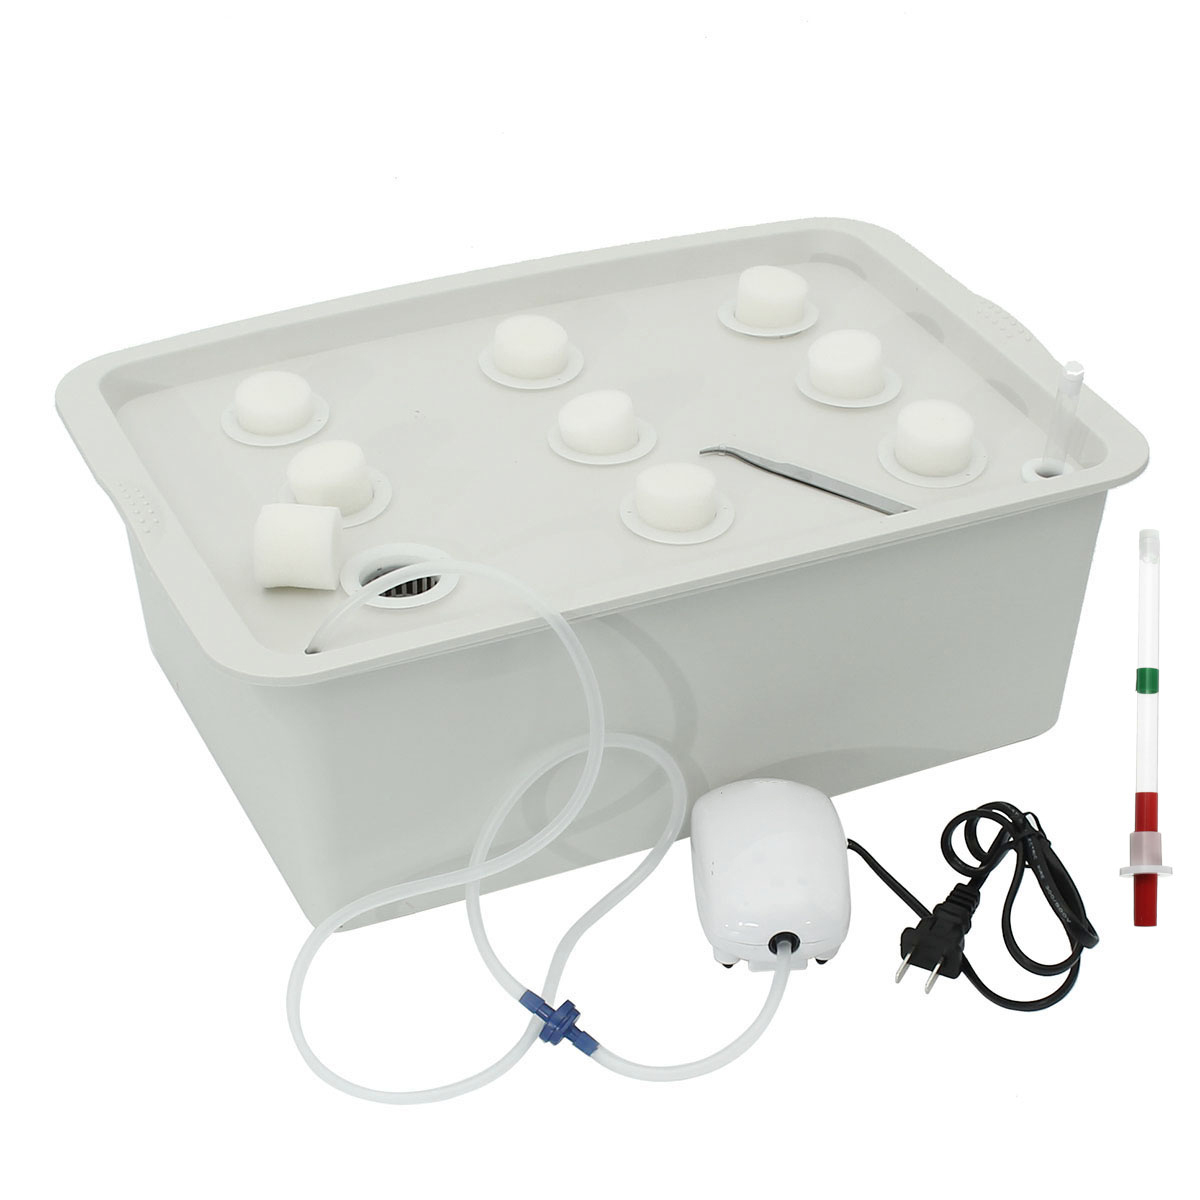 220V-Hydroponic-Grow-Box-9-Holes-DWC-Indoor-Aerobic-Soilless-Cultivation-System-Kit-Water-Planting-1190827-1